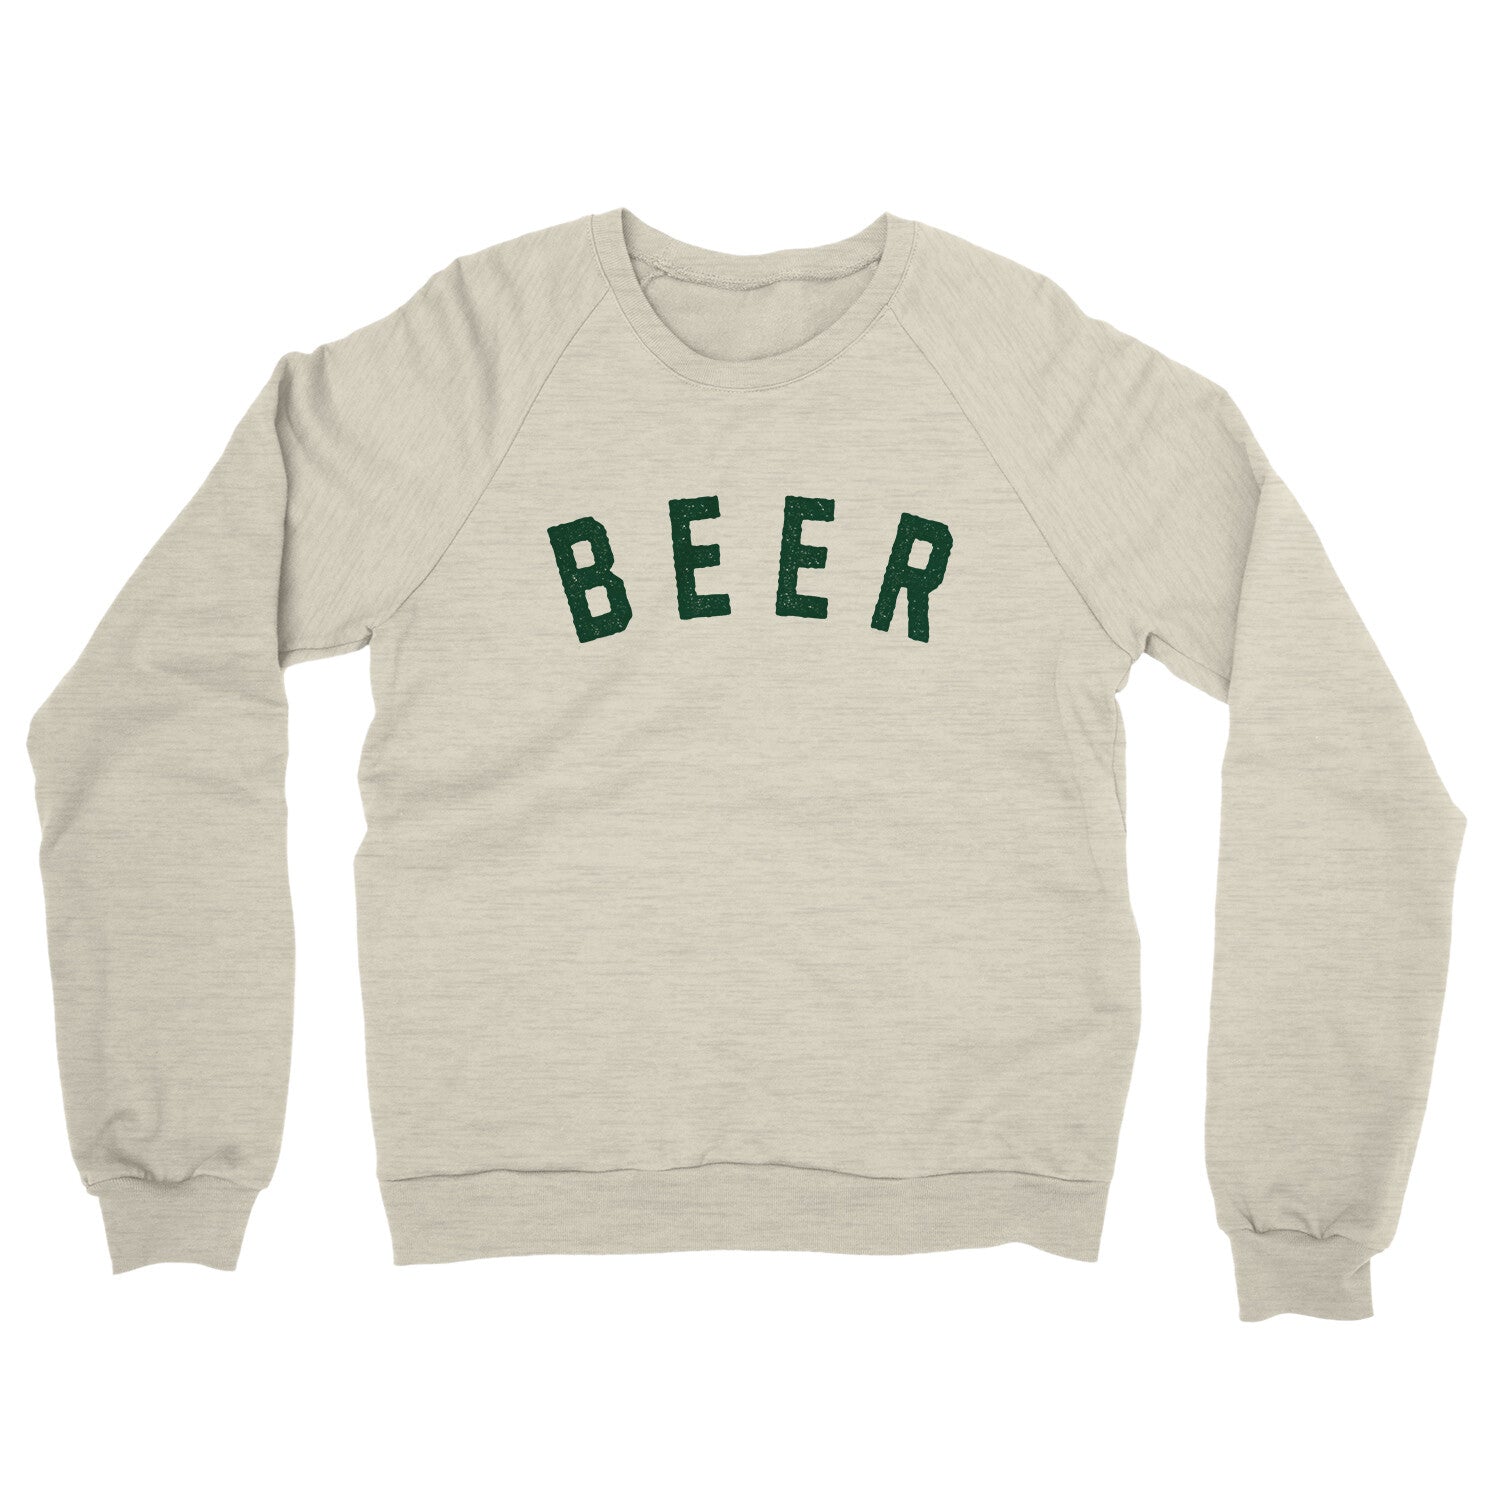 Beer in Heather Oatmeal Color